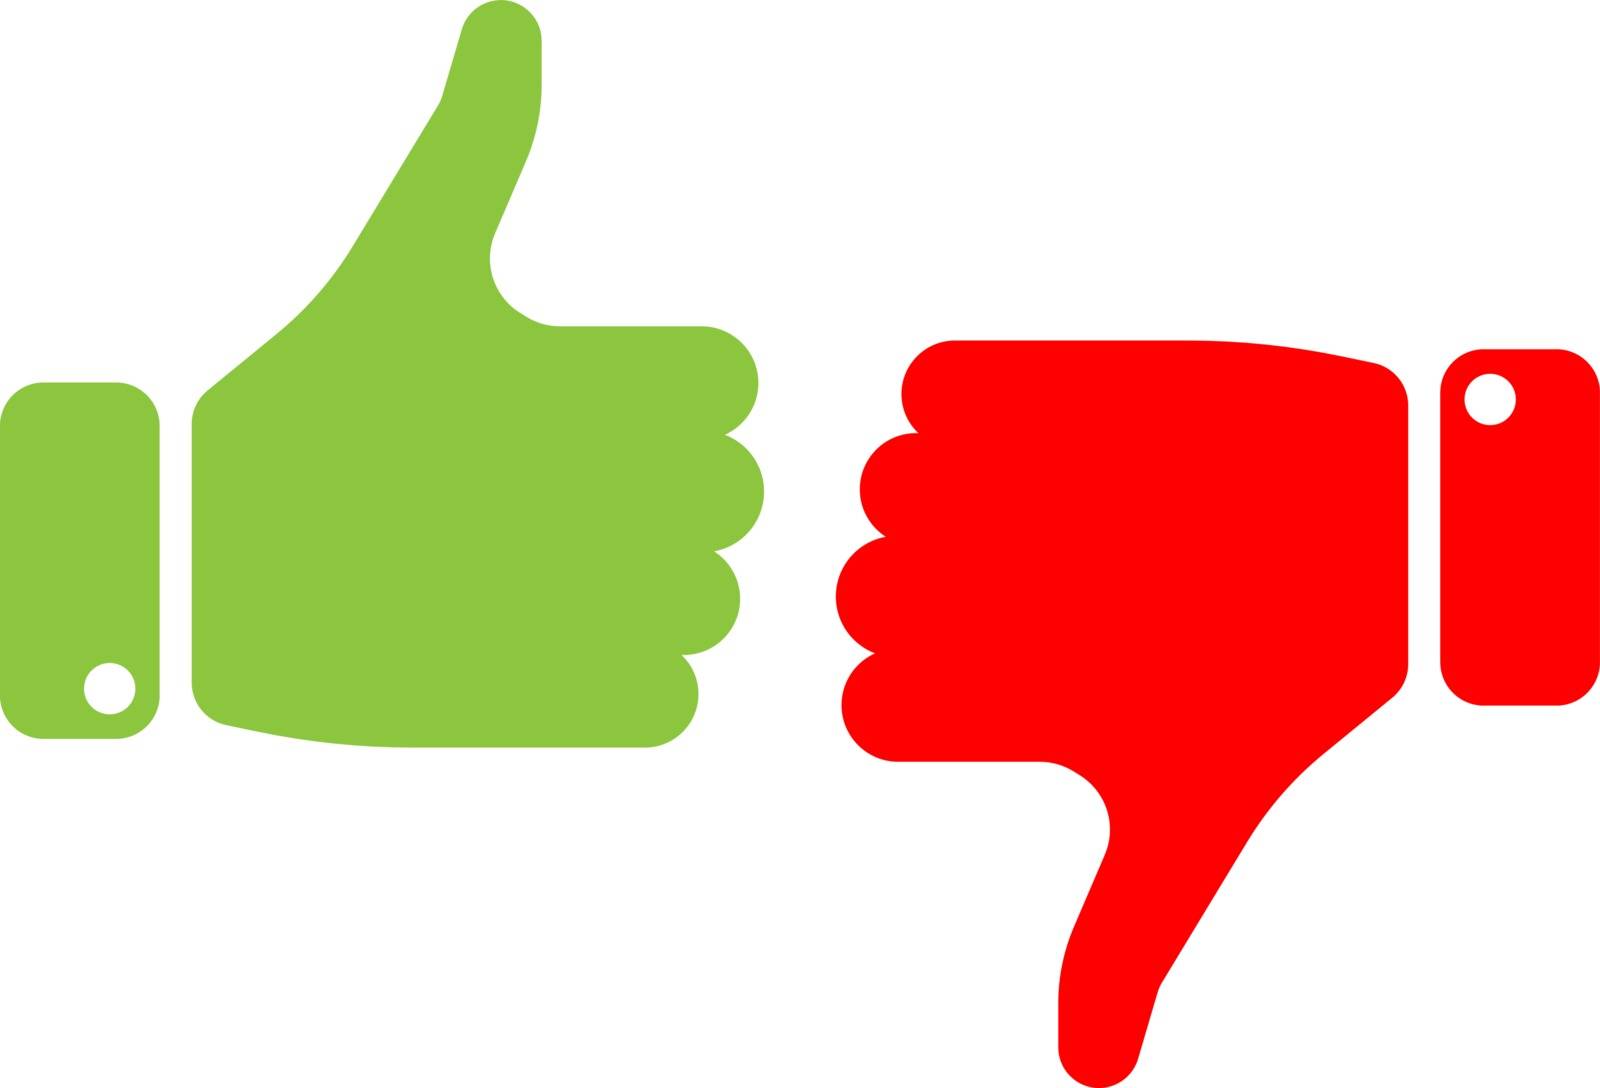 Vote thumbs up icon in red and green . Make a choice, yes or no, love it or hate it, like or dislike win or loss. Vector illustration by pyty